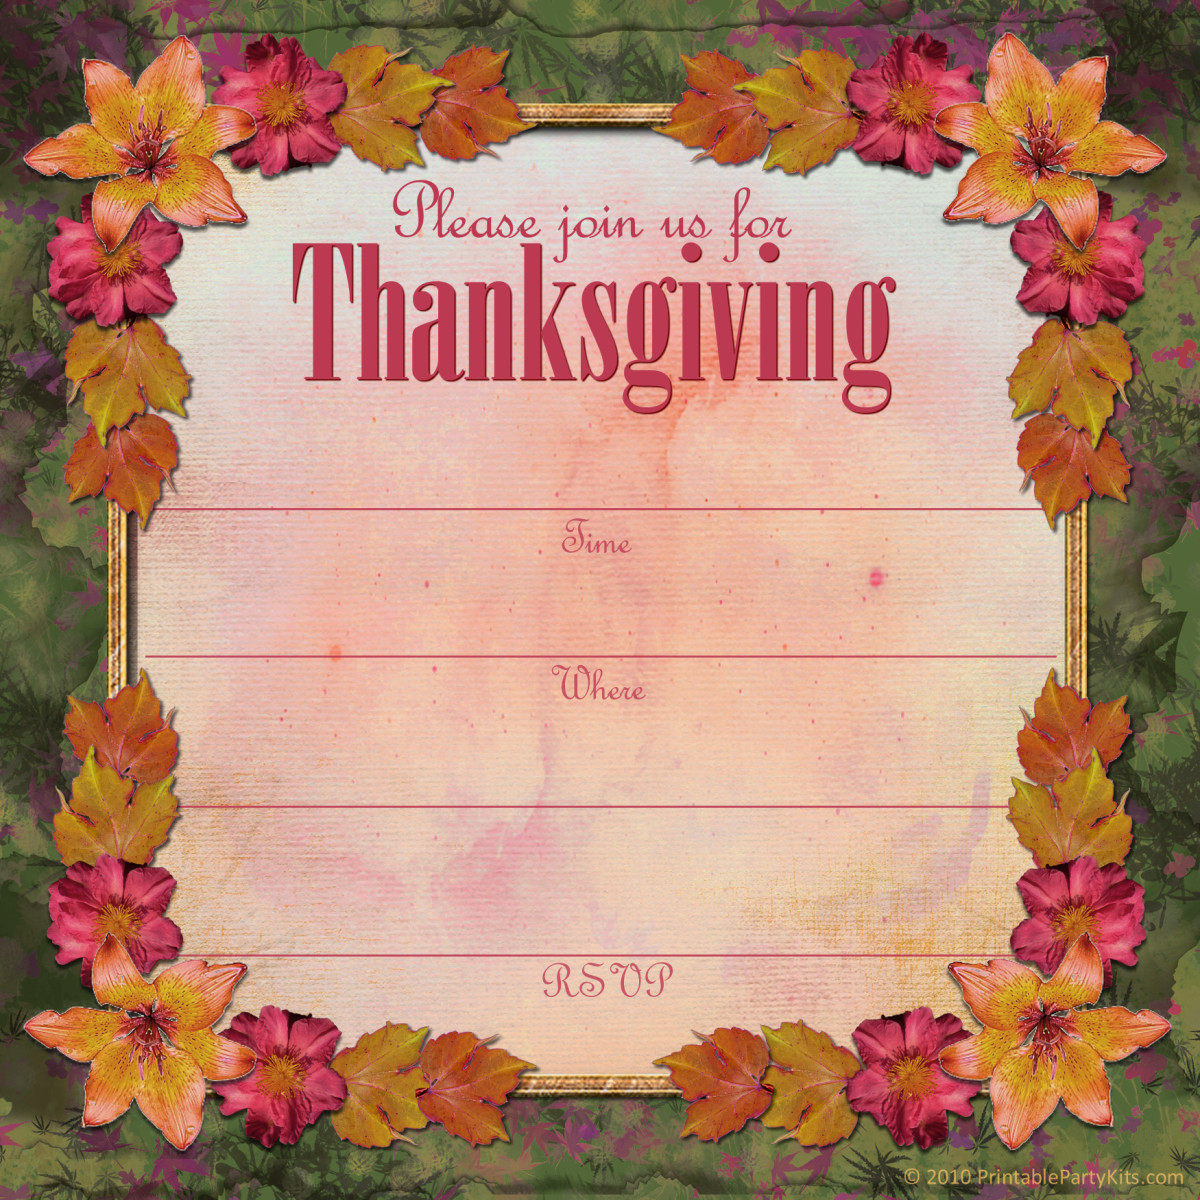 Free Printable Thanksgiving Invitations Templates HubPages